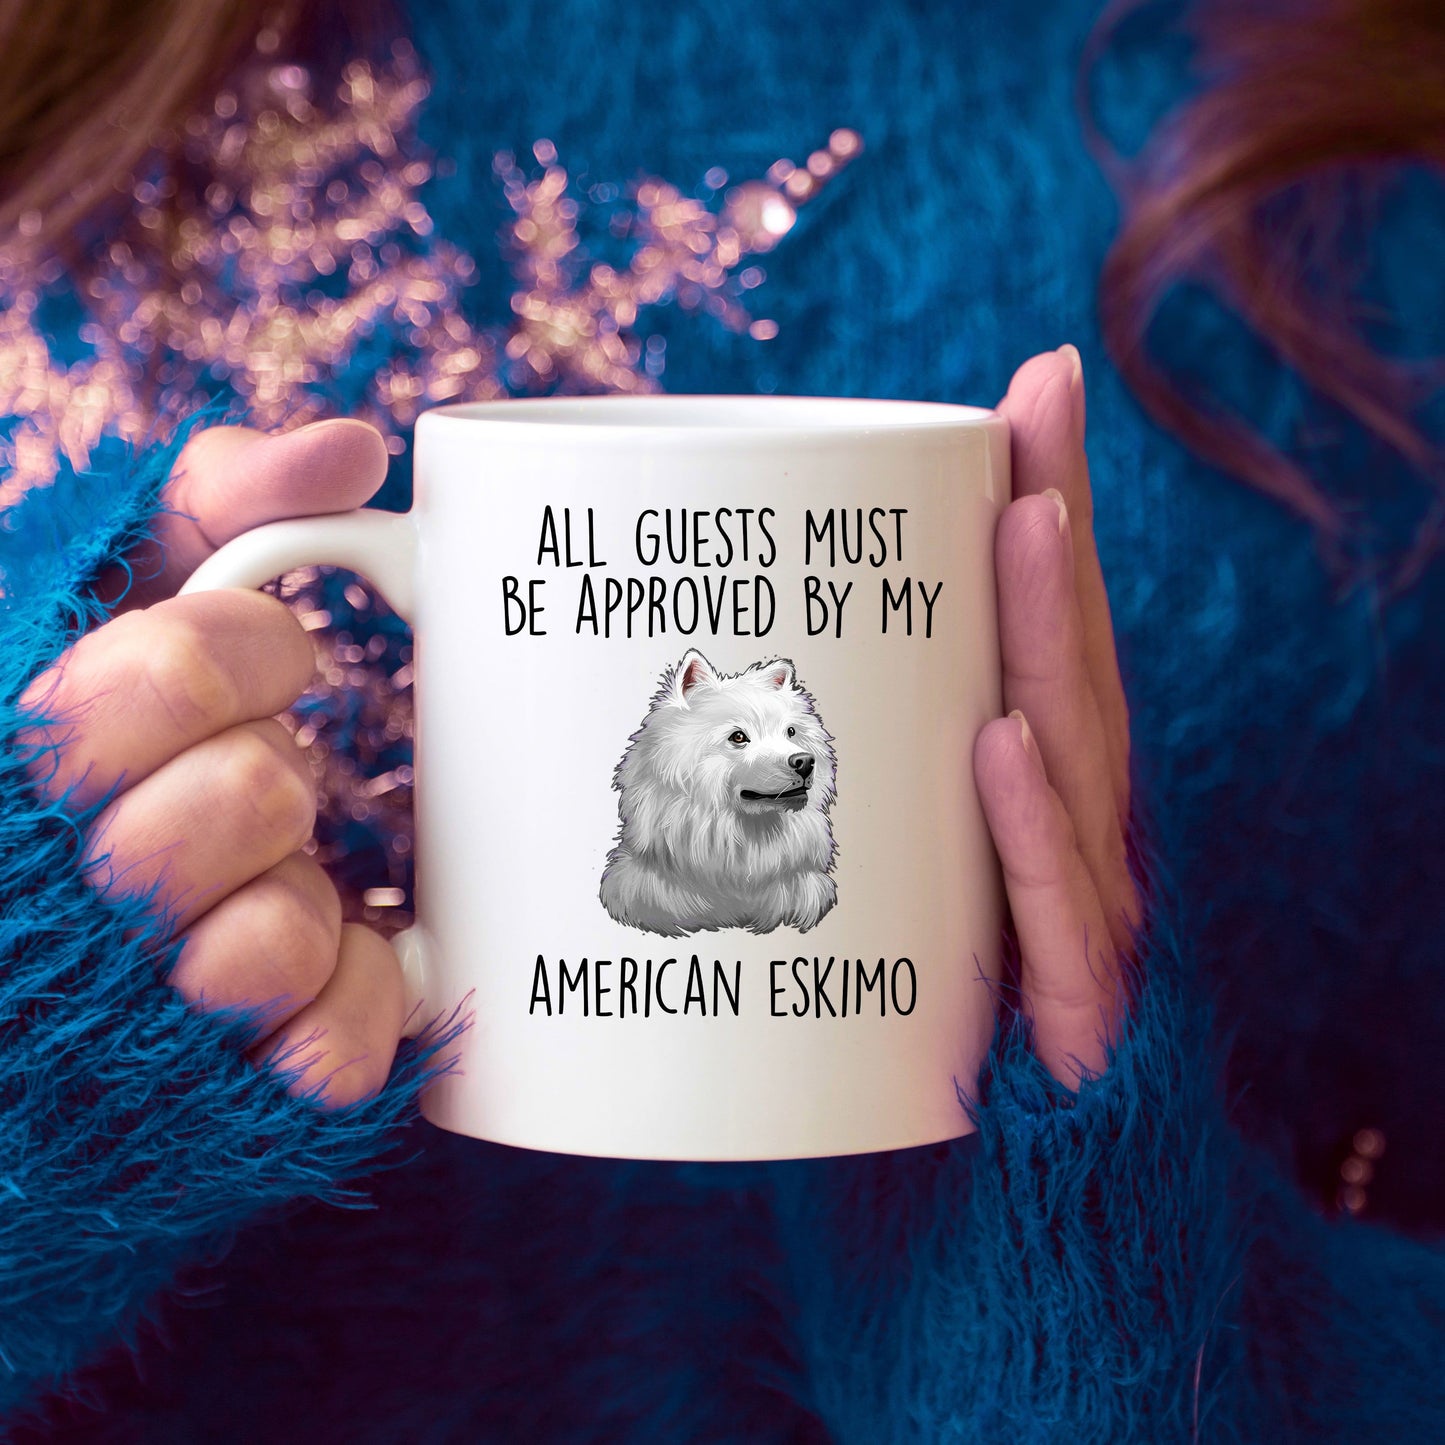 American Eskimo Dog Ceramic Coffee Mug Guests Must Be Approved